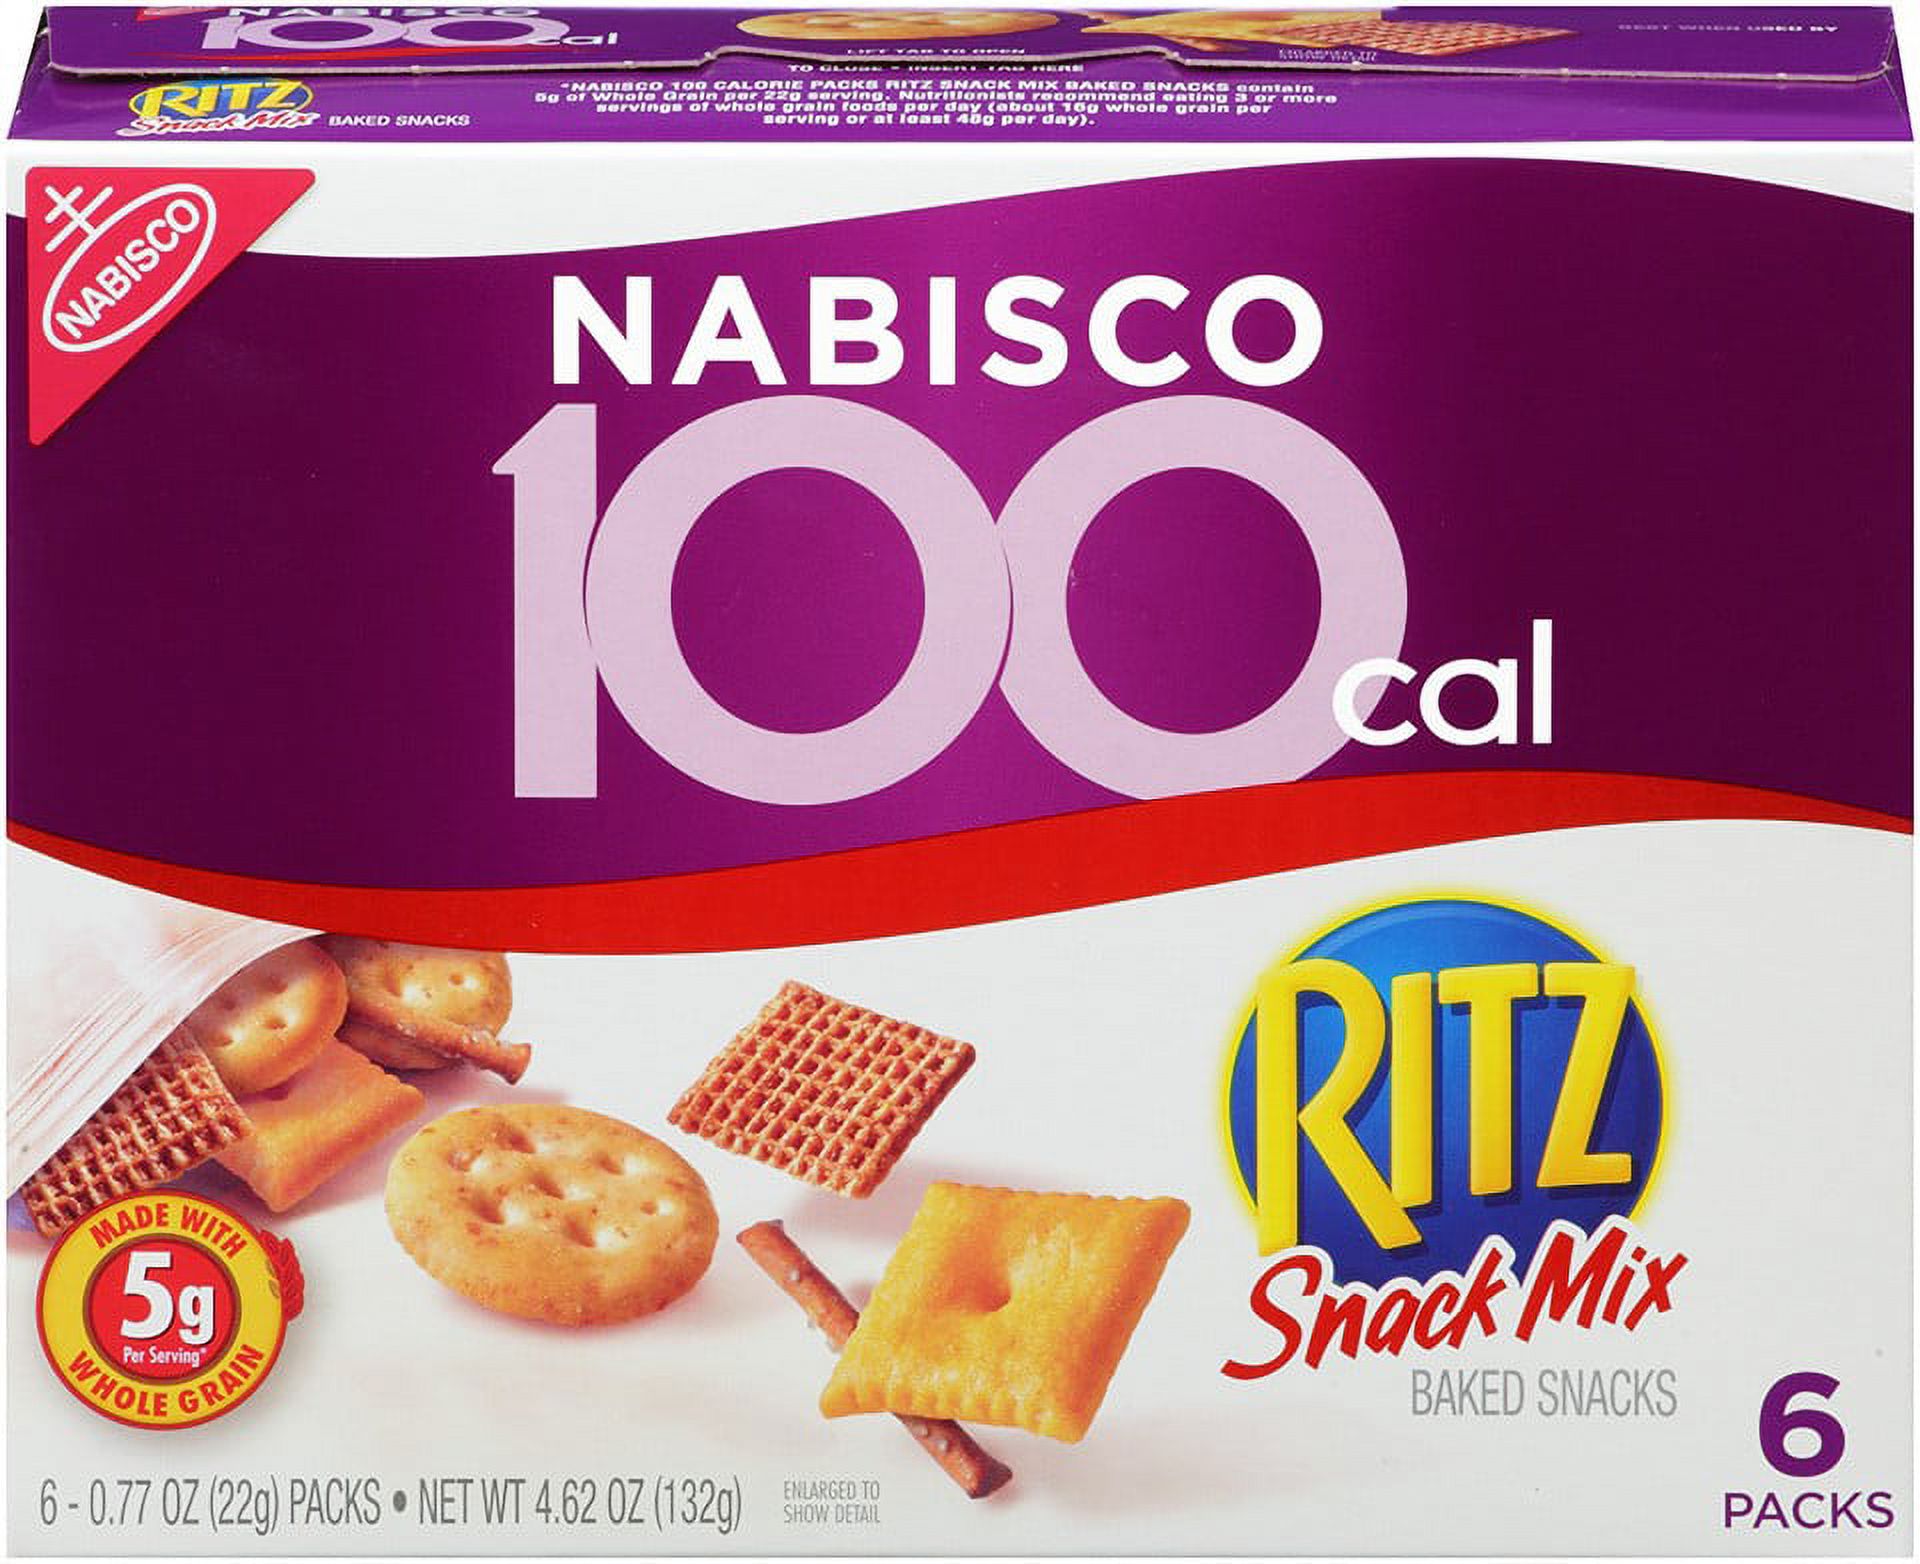 Nabisco 100 Cal Ritz Snack Mix Baked Snacks, 0.77 Oz., 6 Count - image 1 of 4